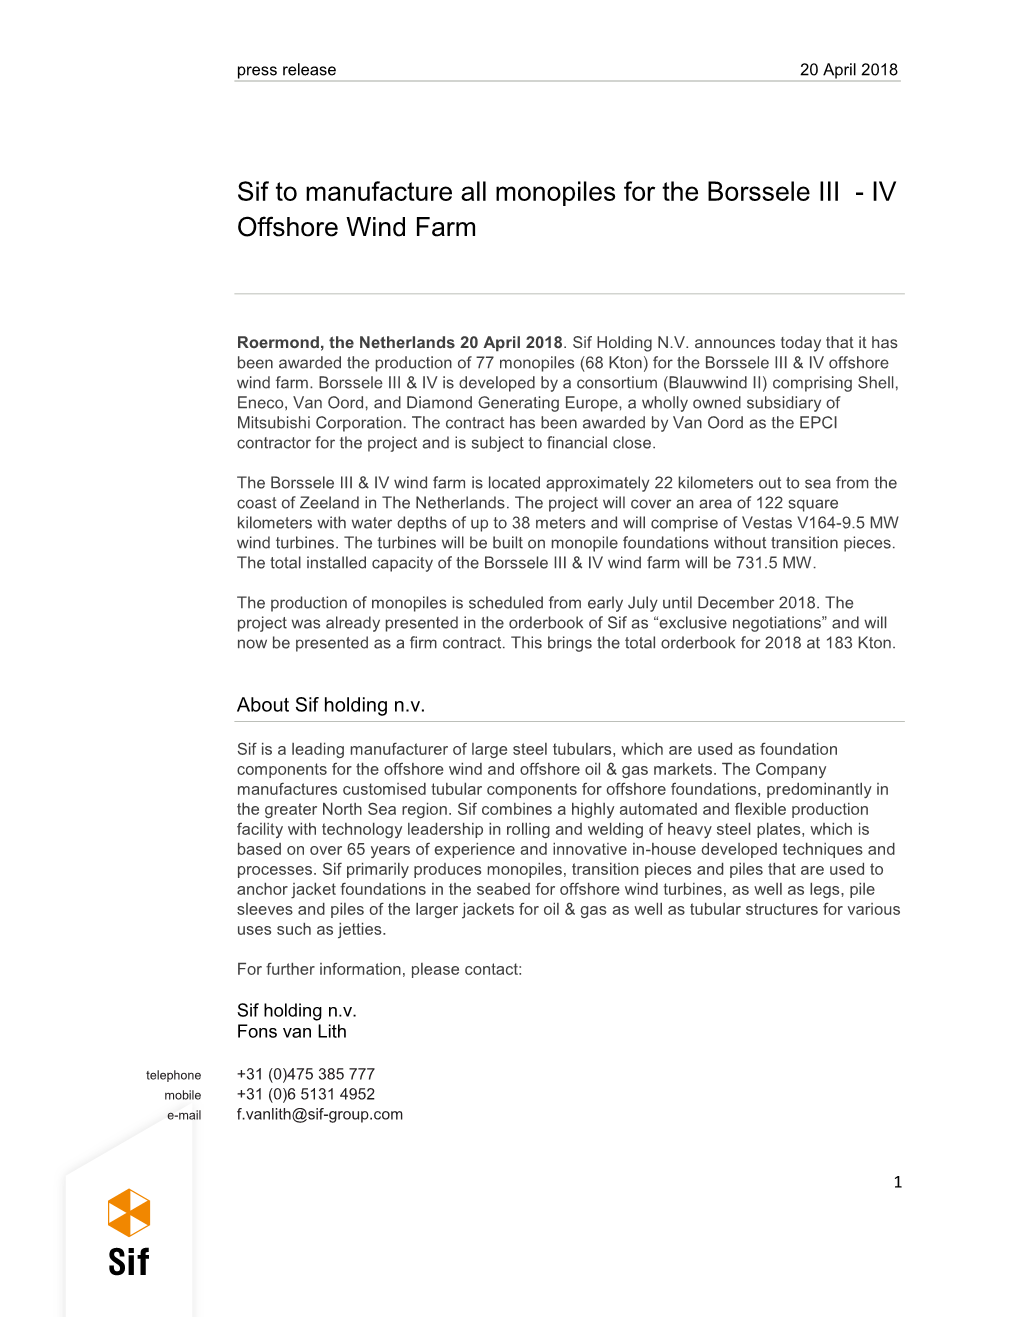 Sif to Manufacture All Monopiles for the Borssele III - IV Offshore Wind Farm